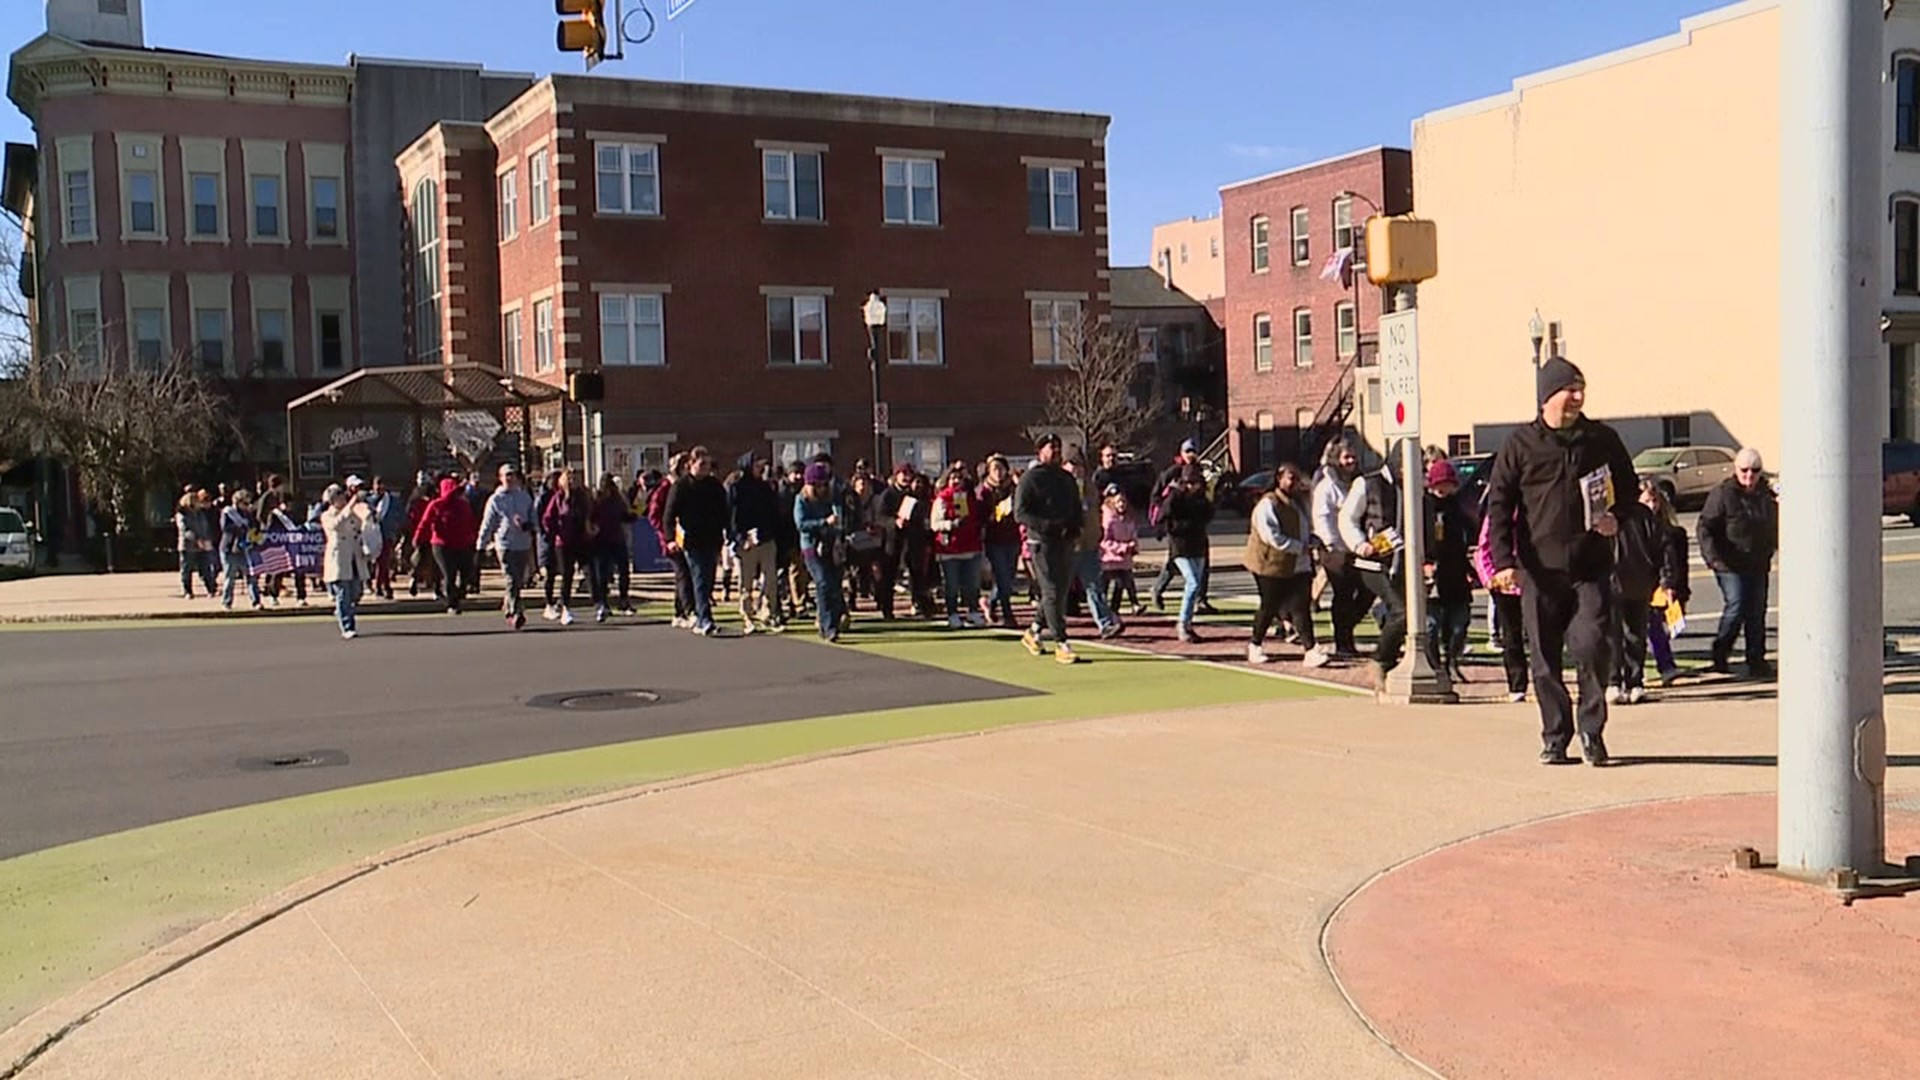 Crowds honoring Martin Luther King Jr.'s legacy gathered along Market Square in the city Monday afternoon.